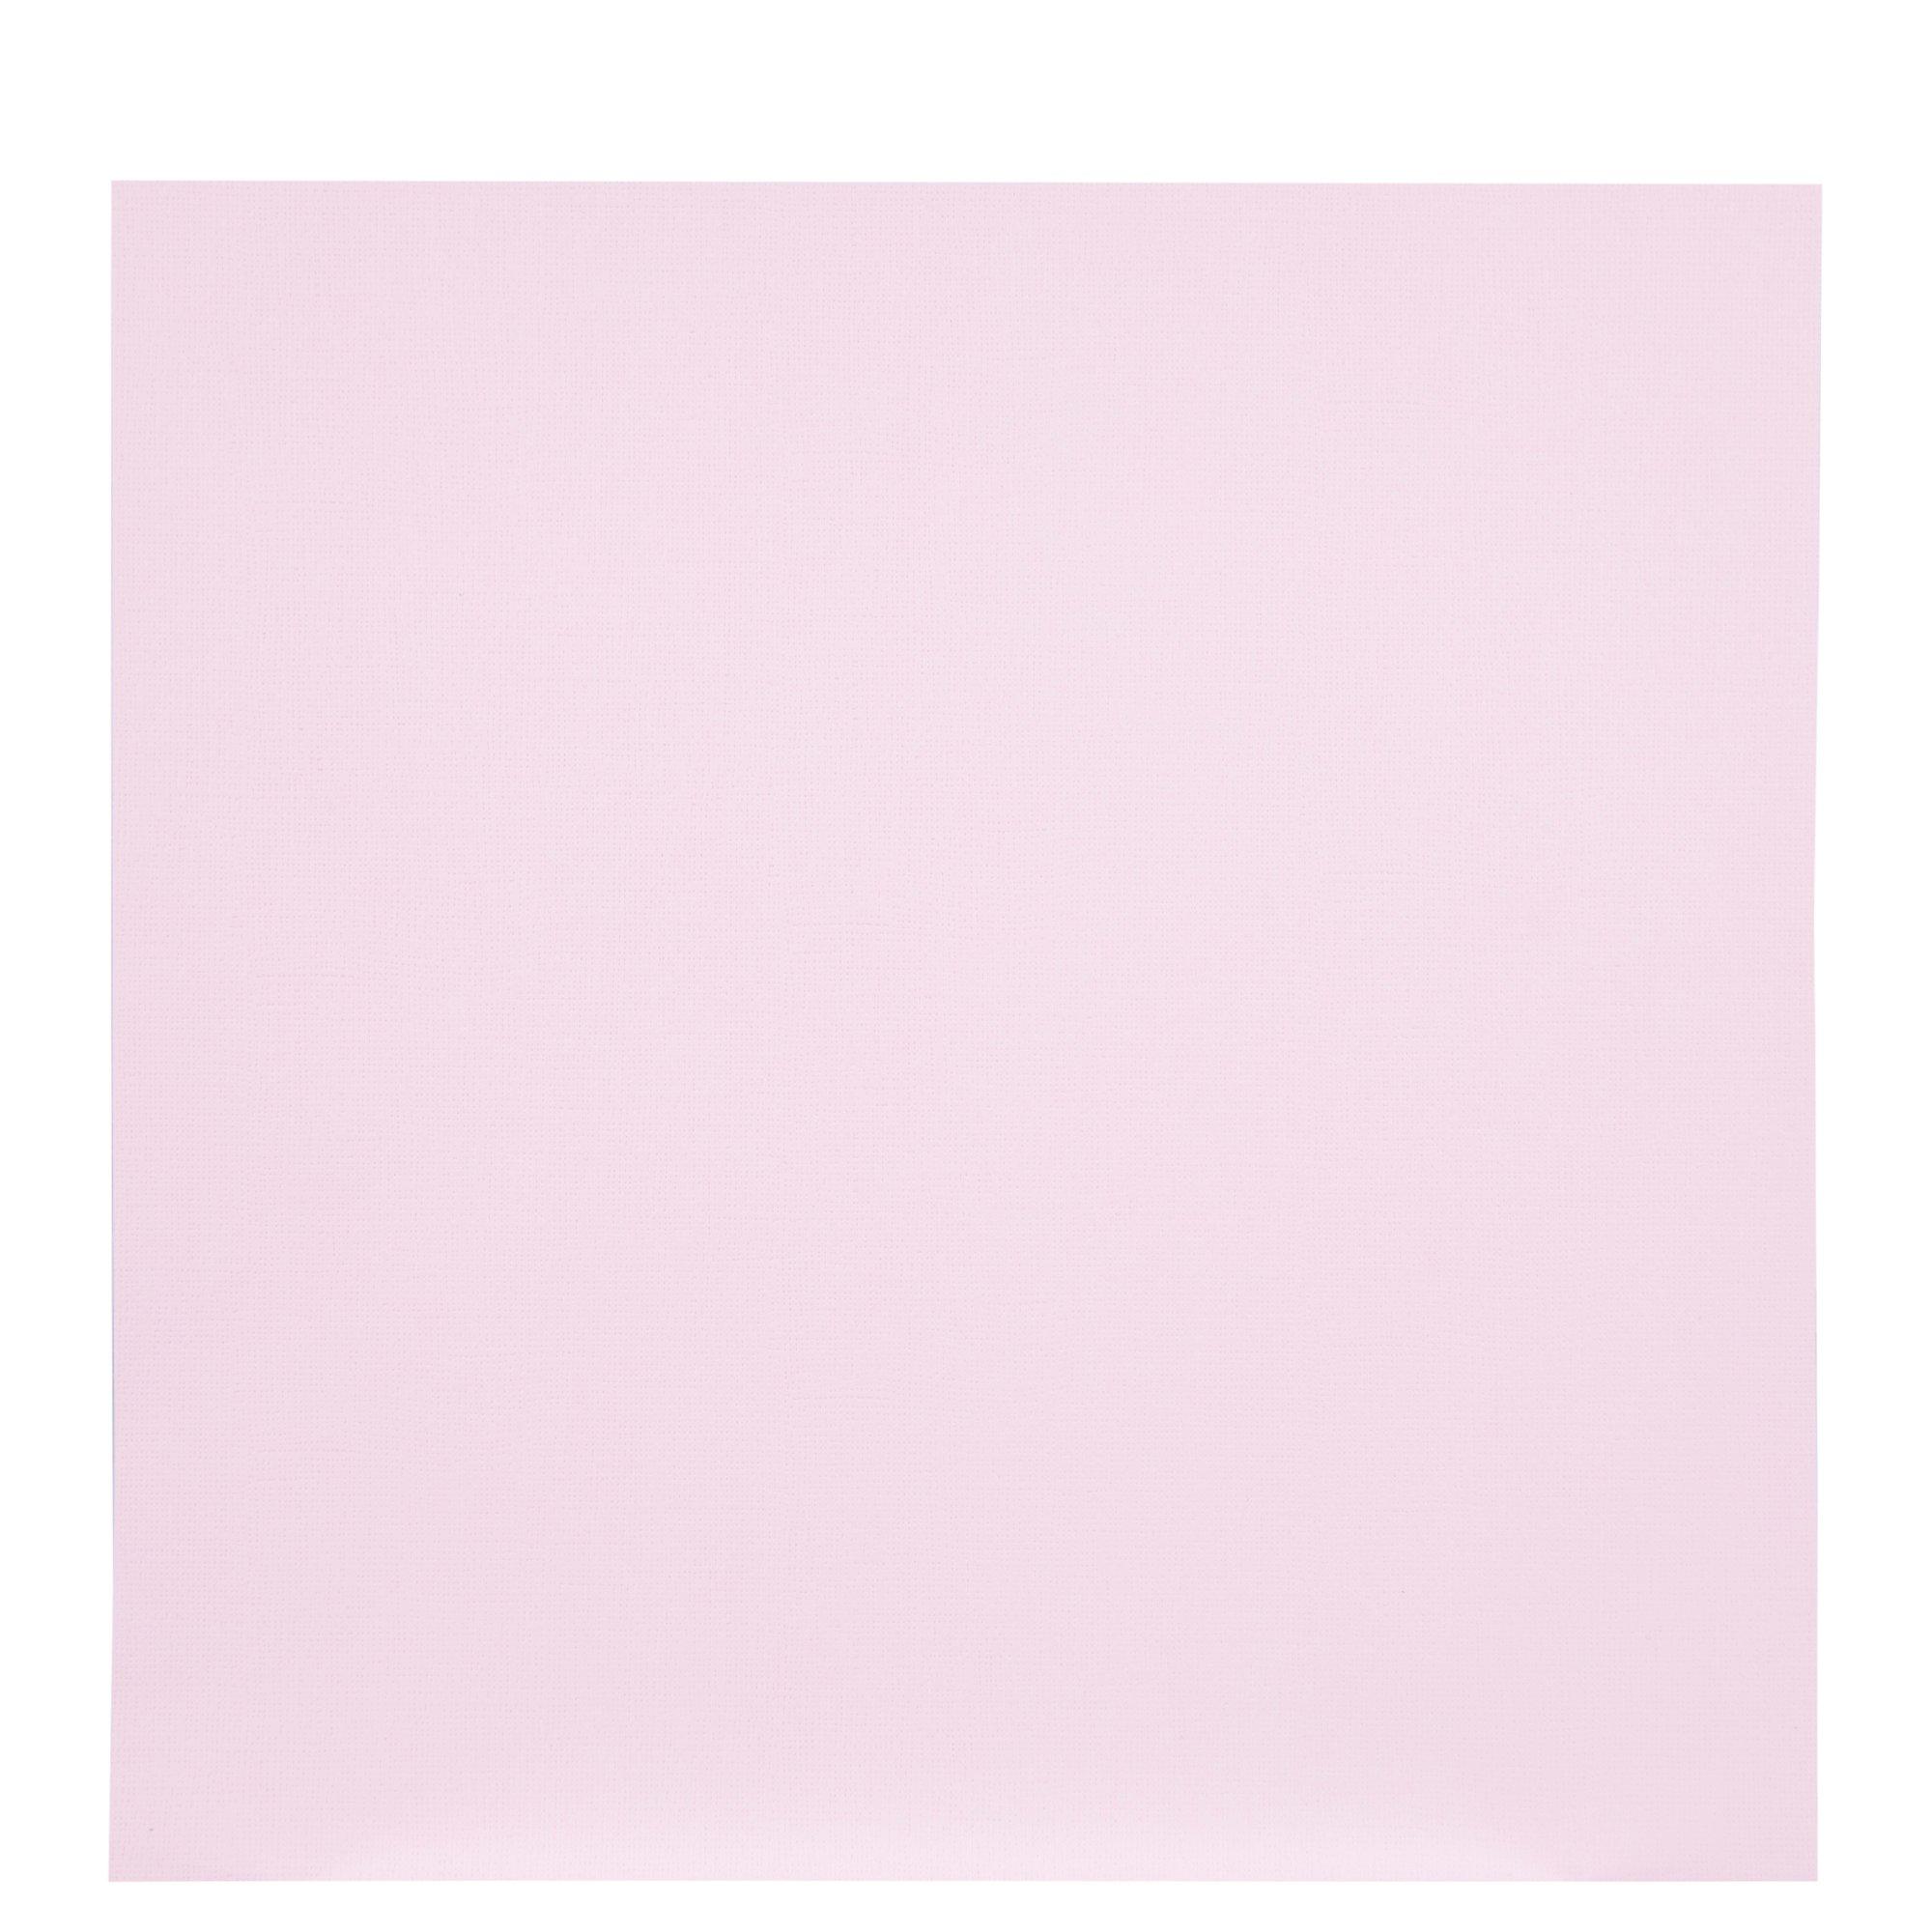 Burano PINK (10) - 12X12 Cardstock Paper - 92lb Cover (250gsm